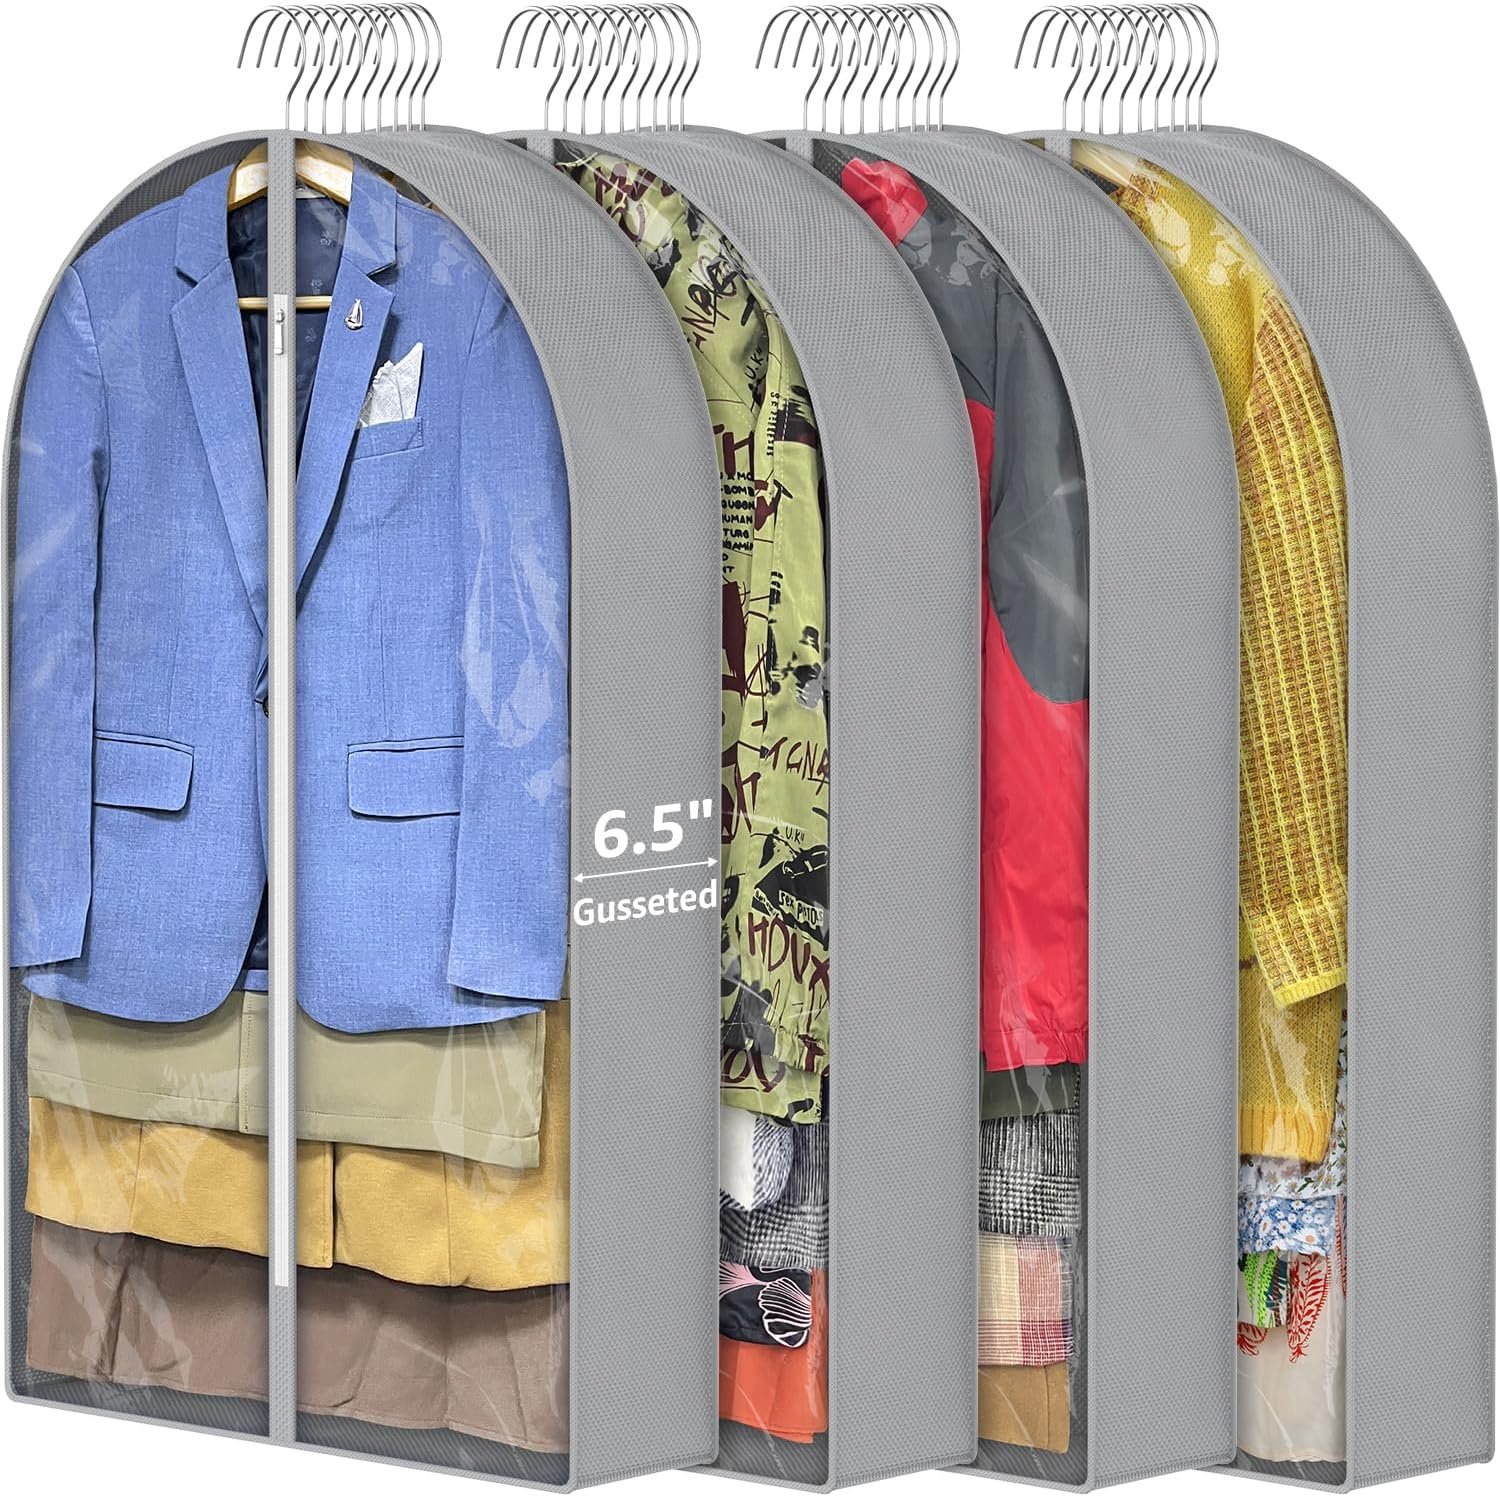 LAPPR 4 Pack 40 Garment Bags for Hanging Clothes with 6.5 Gusseted,Moth Proof Clothes Bags for Storage Hanging, Clothing Bags with Zipper Protecting Travel Suit Bags : Home  Kitchen